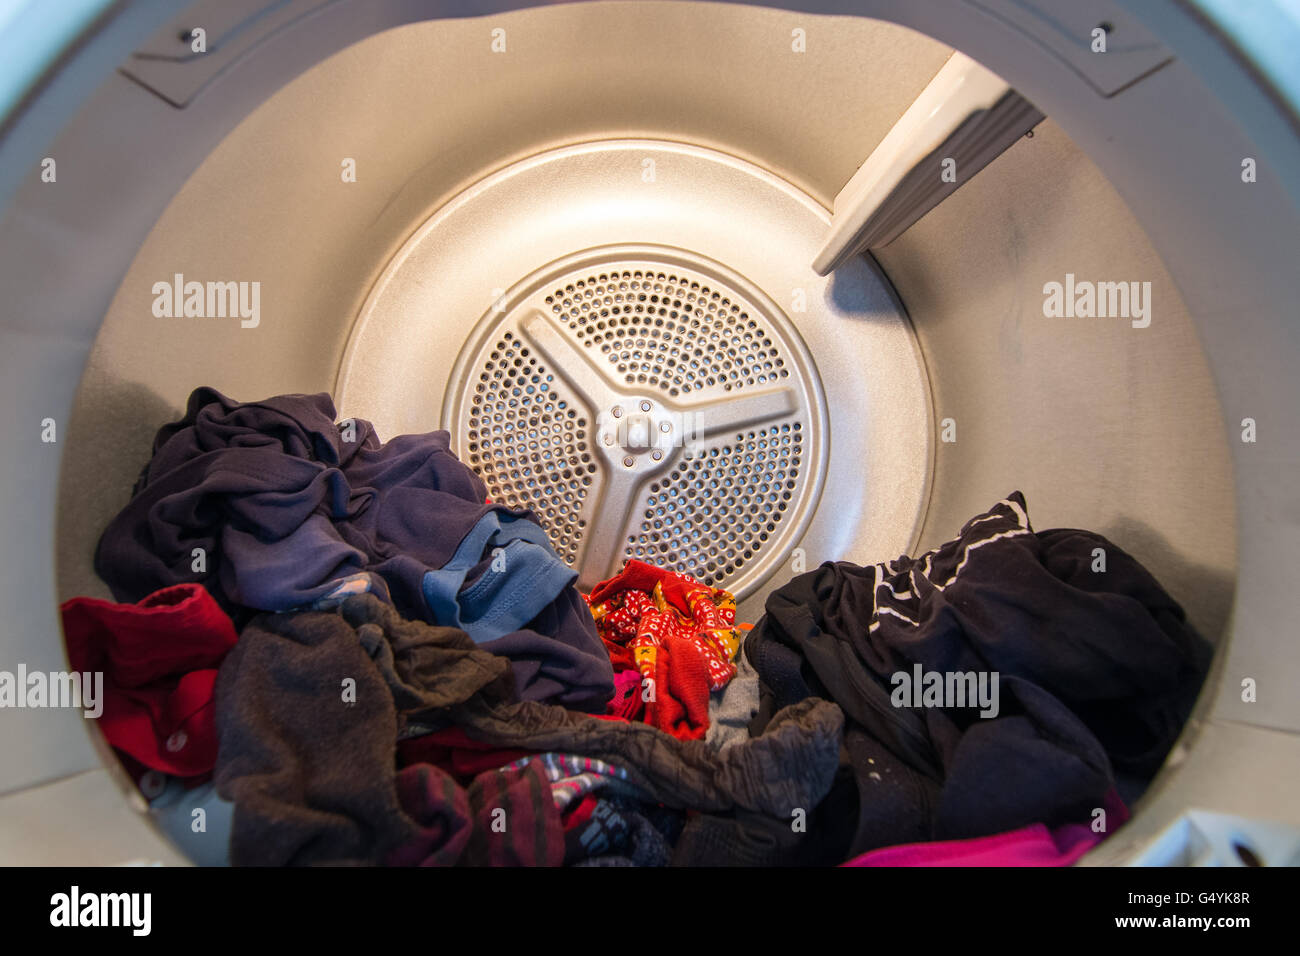 Inside view of a domestic tumble drier (clothes drier) with clothing in it Stock Photo